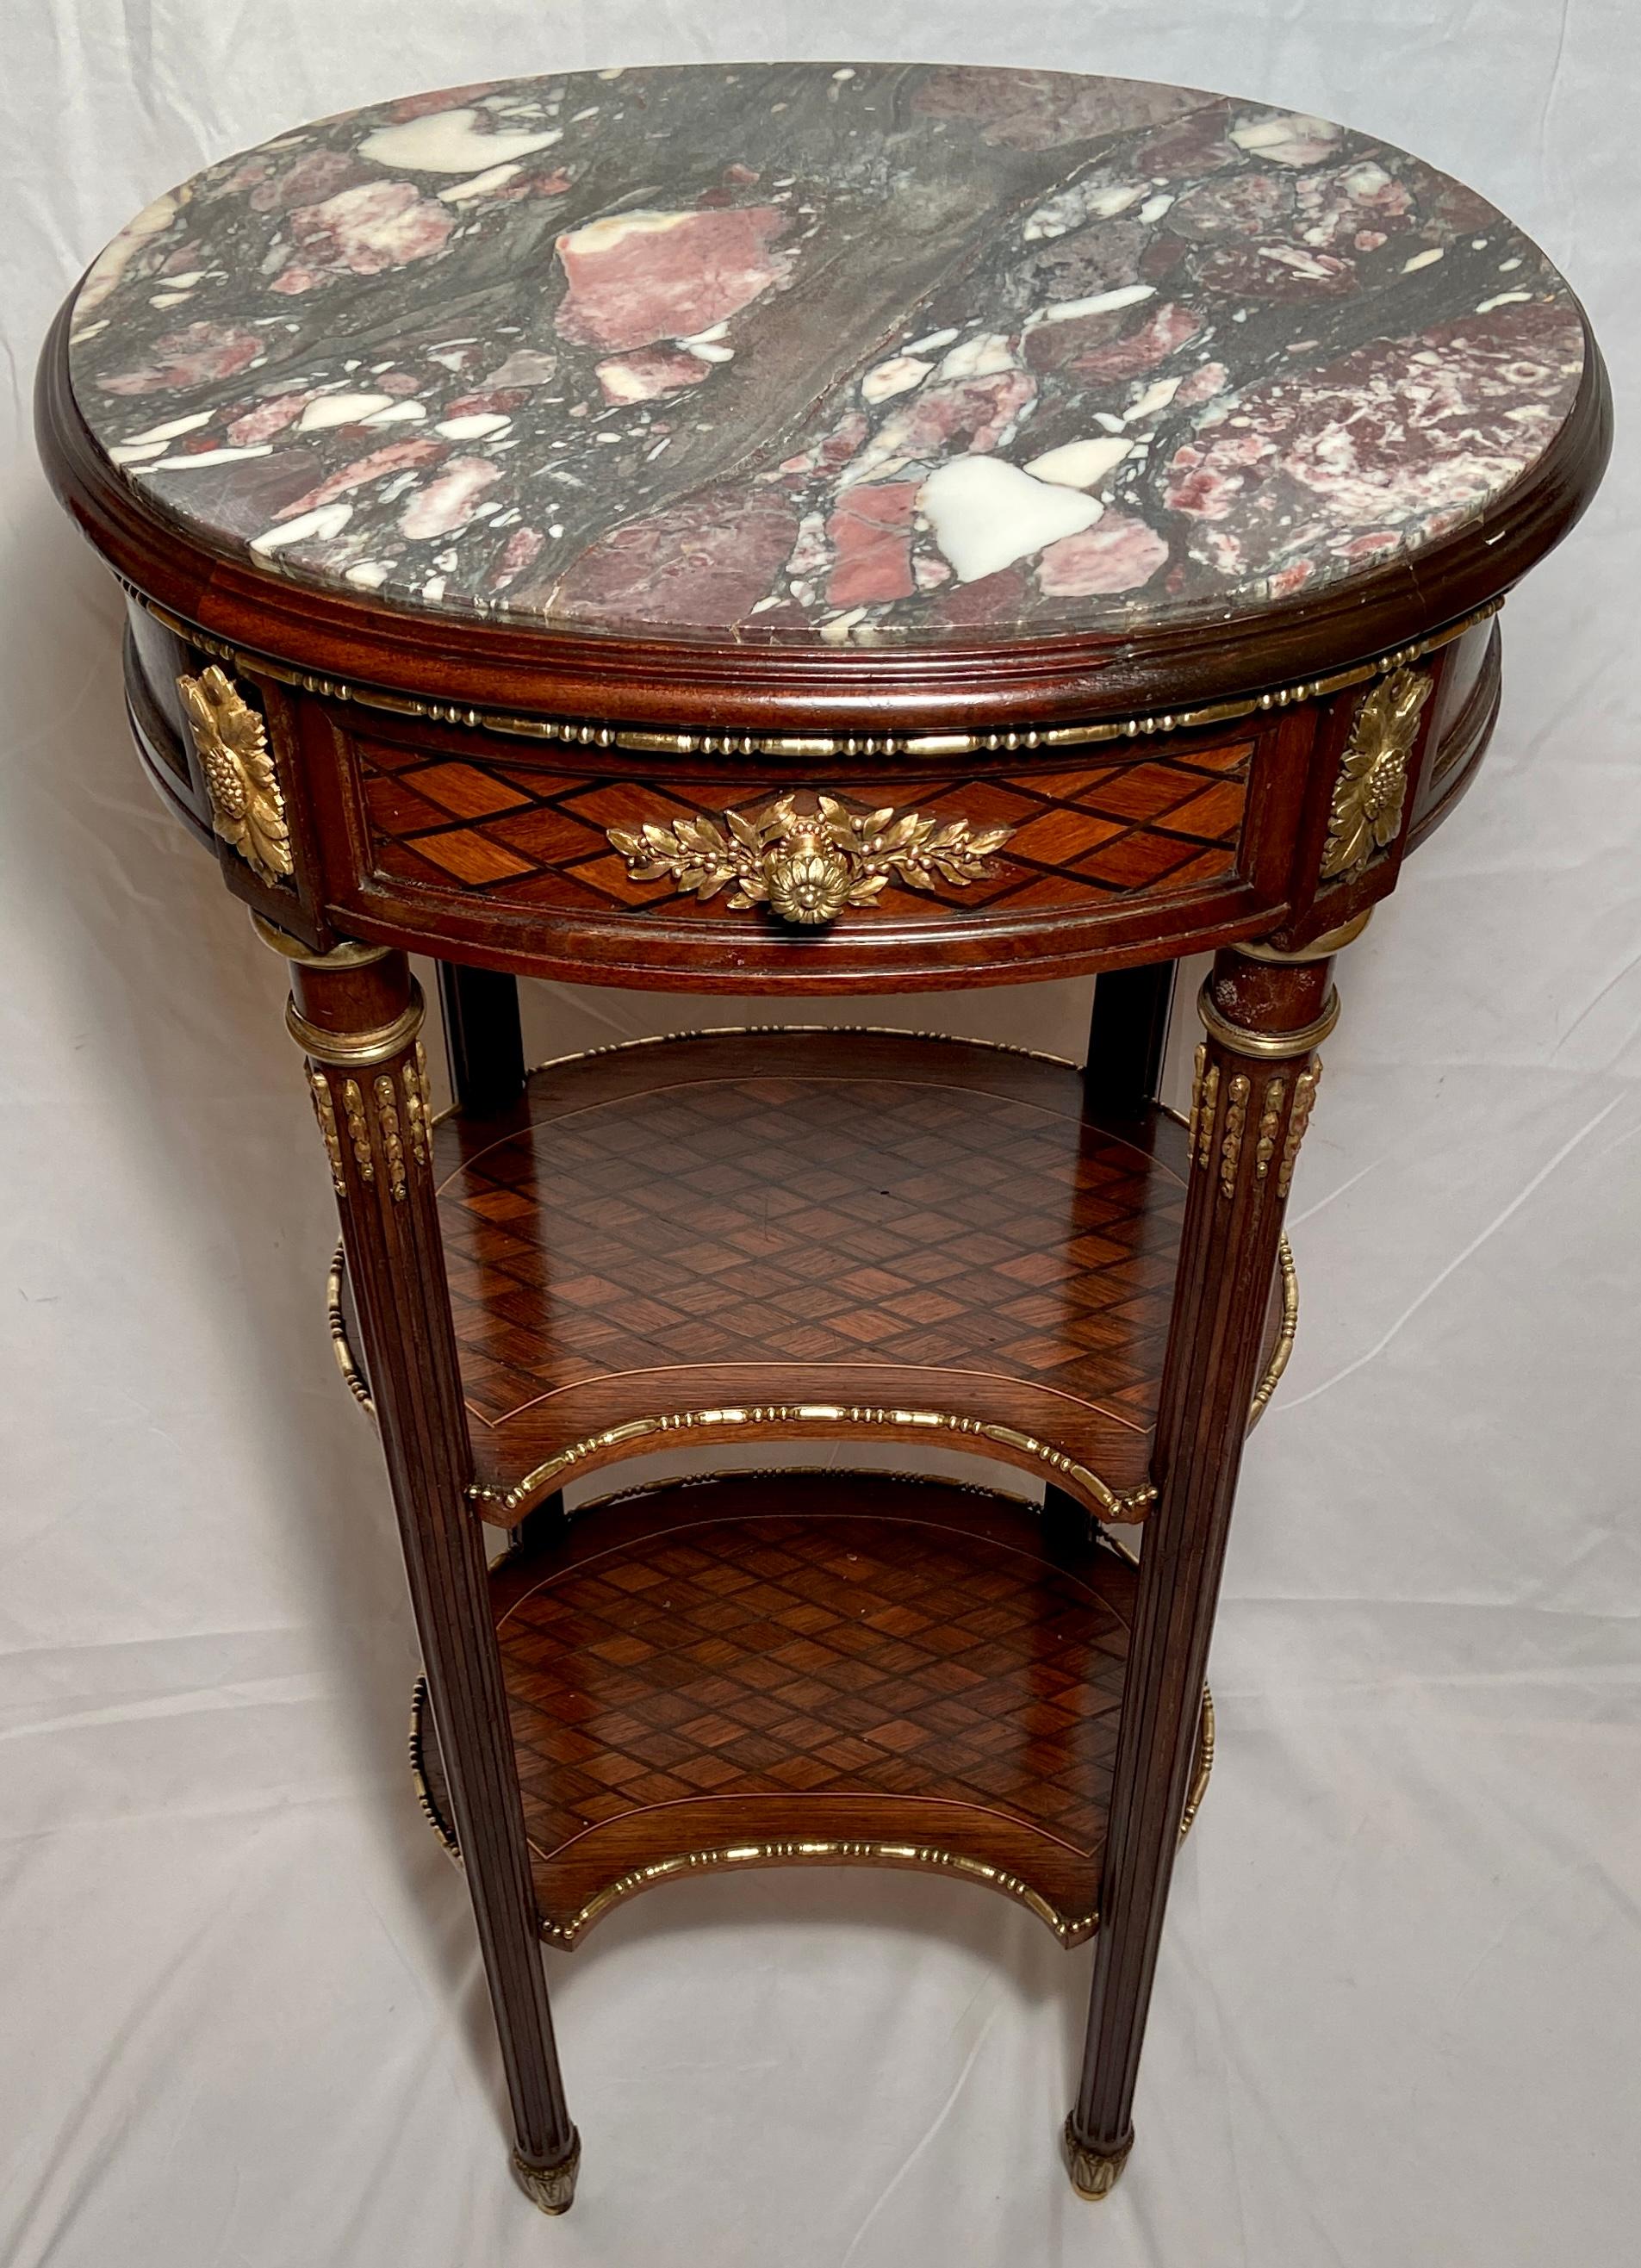 Antique French Louis XVI marble-top occasional table with exotic wood inlay and ormolu trim.